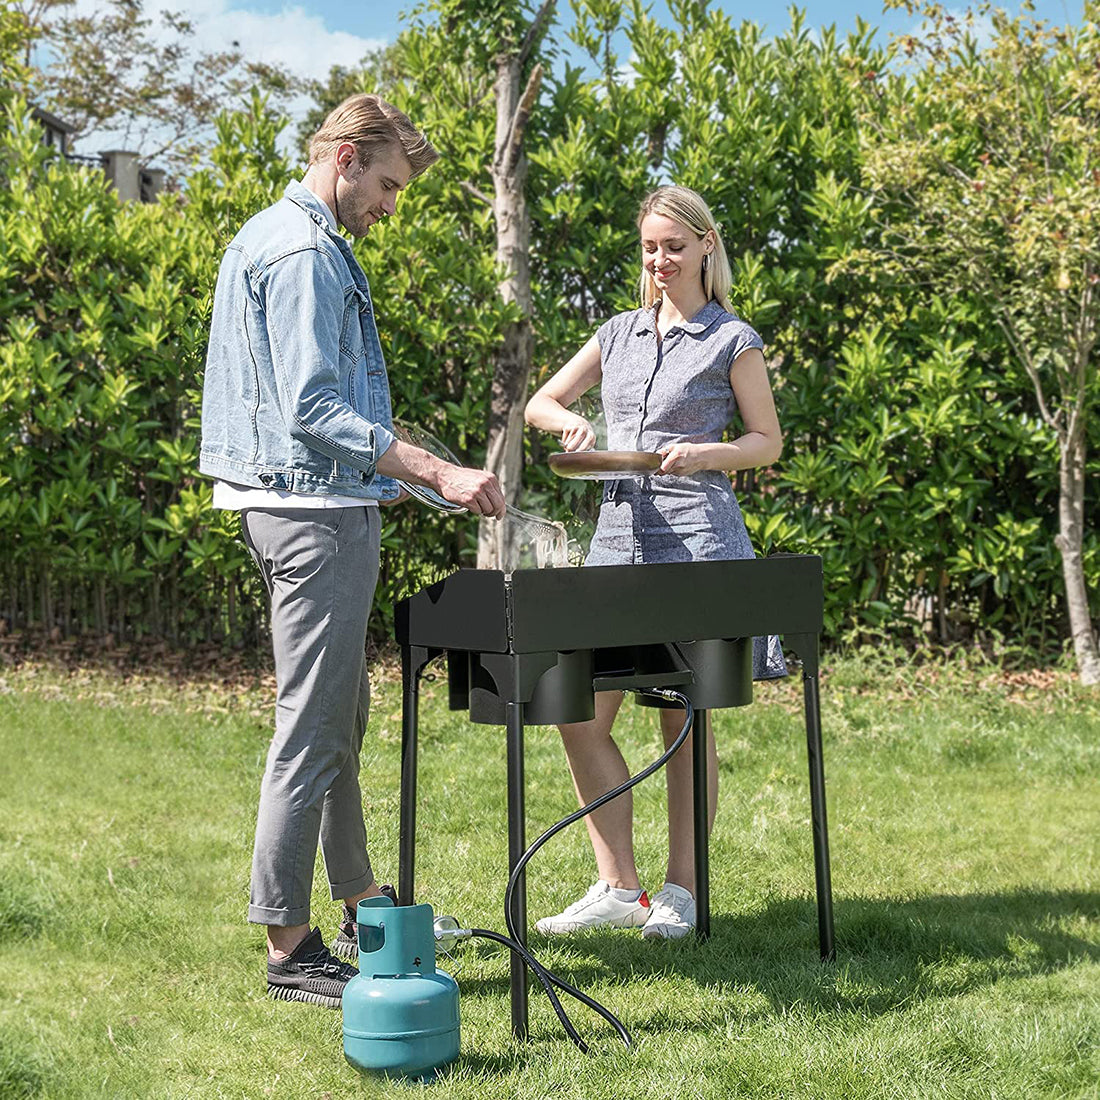  VIVOHOME Double Burner Stove, Heavy Duty Outdoor Dual Propane with Windscreen and Detachable Legs Stand for Camping Cookout, Max. 150,000 total BTU/hr